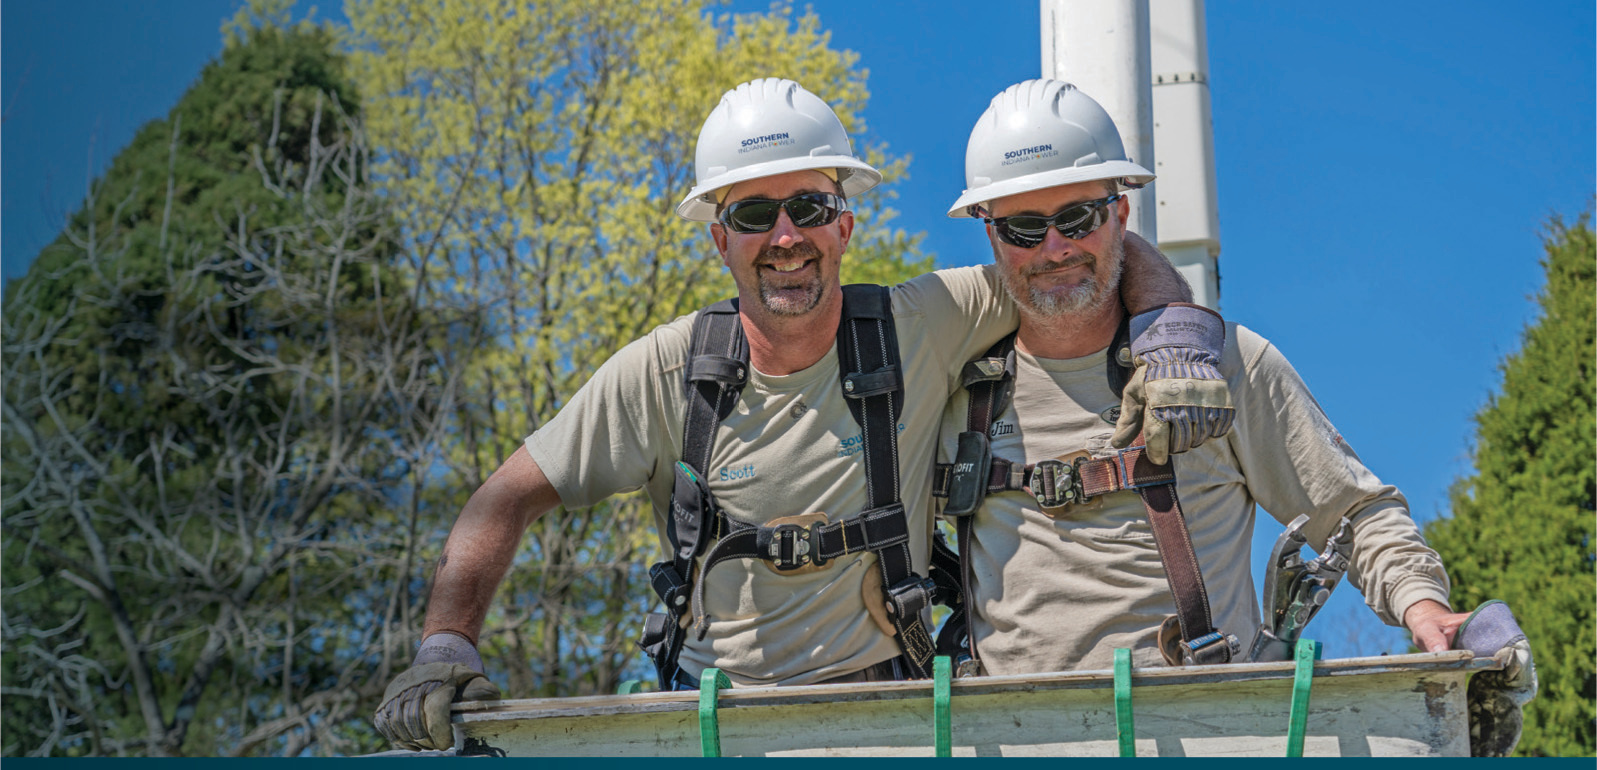 Southern Indiana Power Linemen Scott Peter and James Applegate.